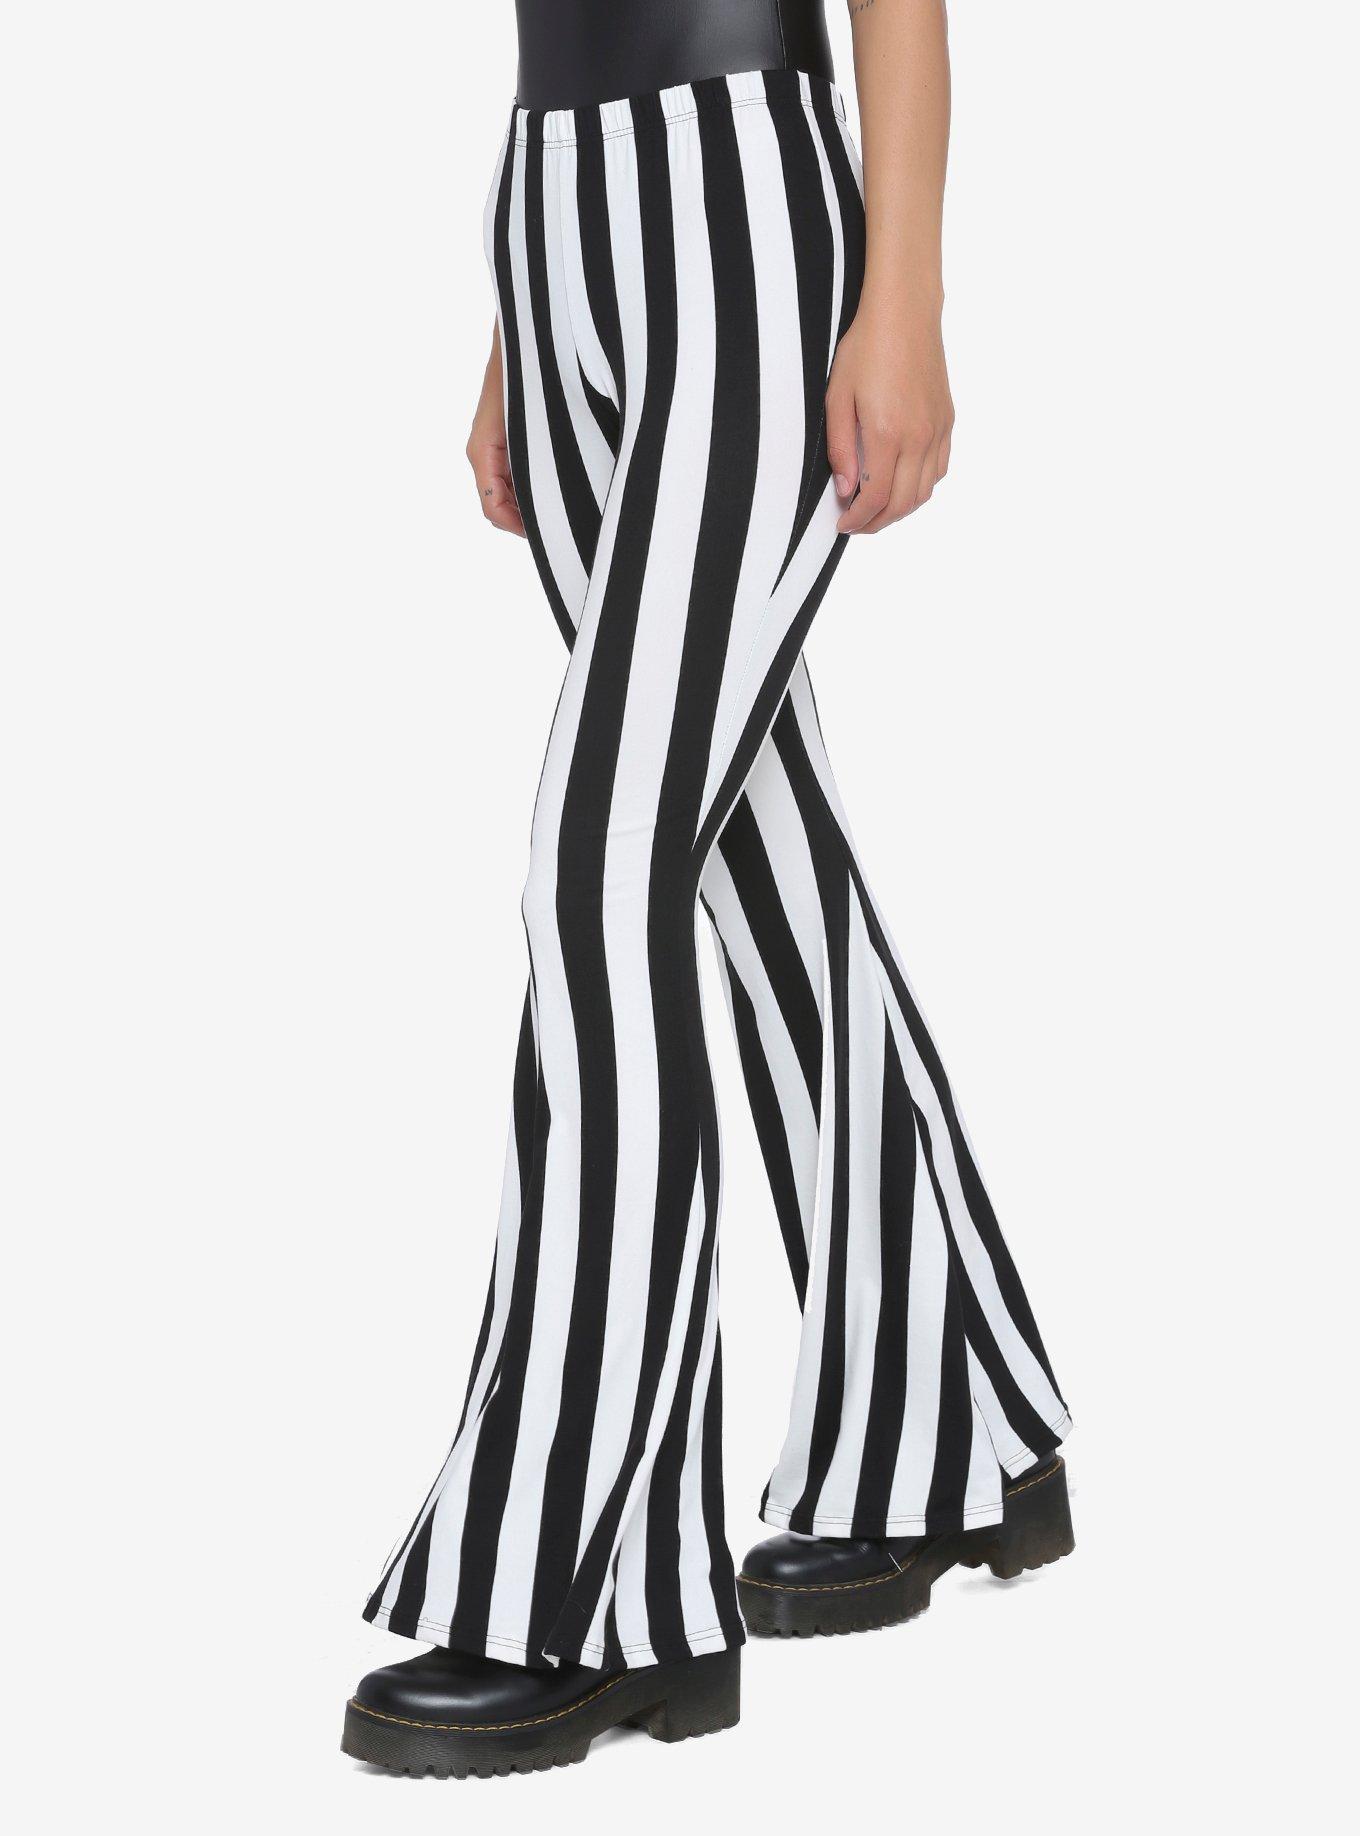 Yummy Material Flare Pants Solid with White Stripes - Its All Leggings